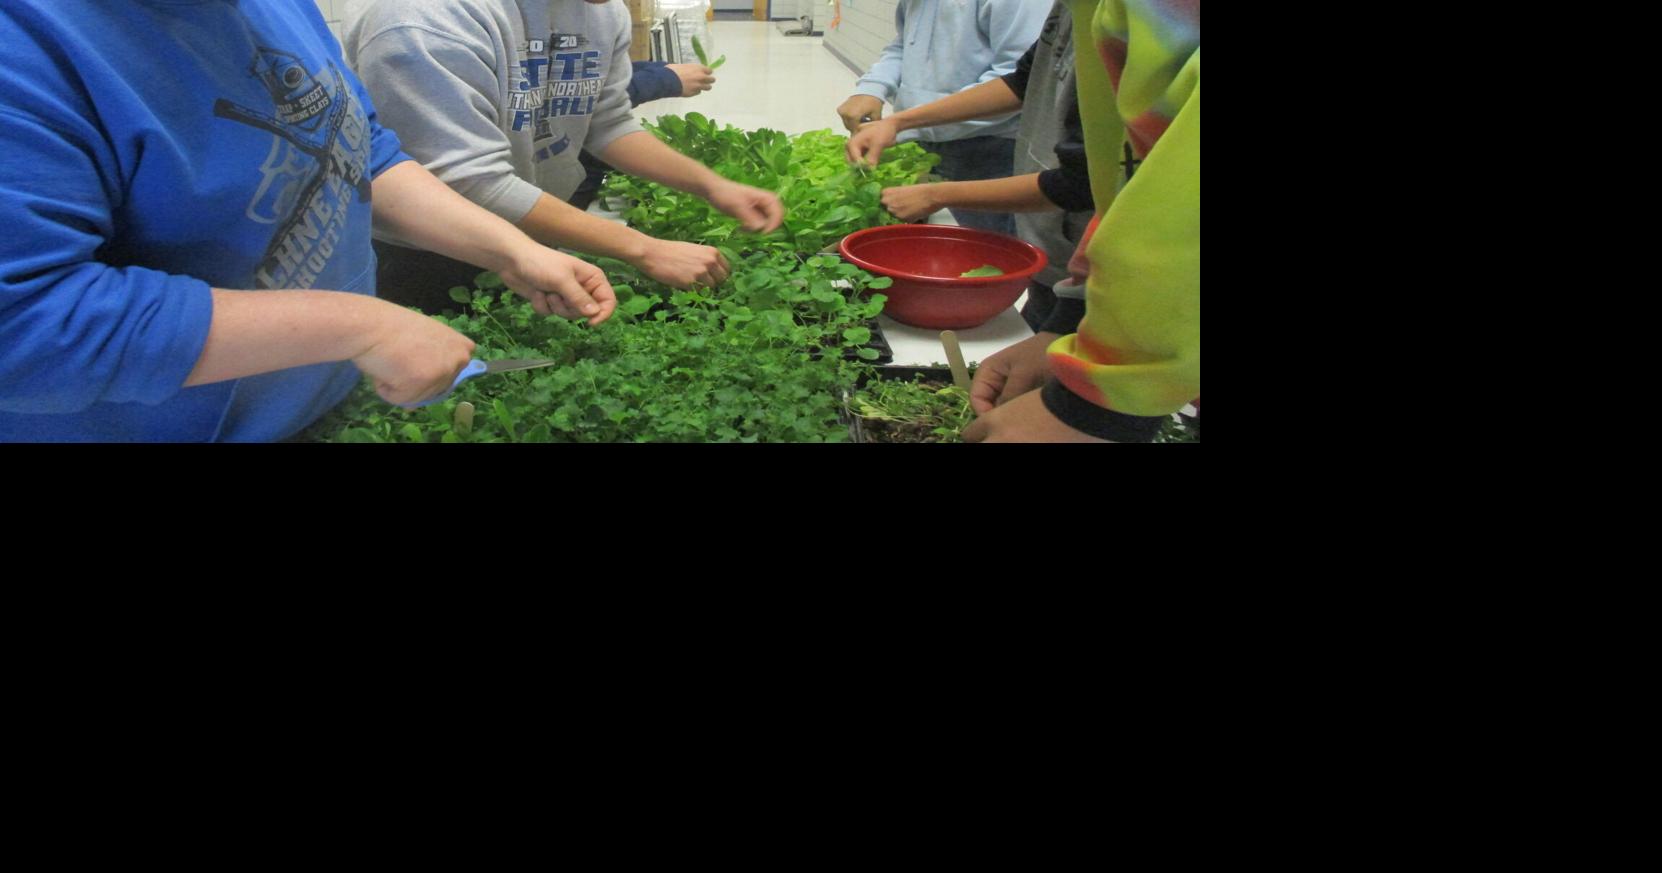 Passion of many makes ag addition possible at Lutheran High Northeast | Farm Youth